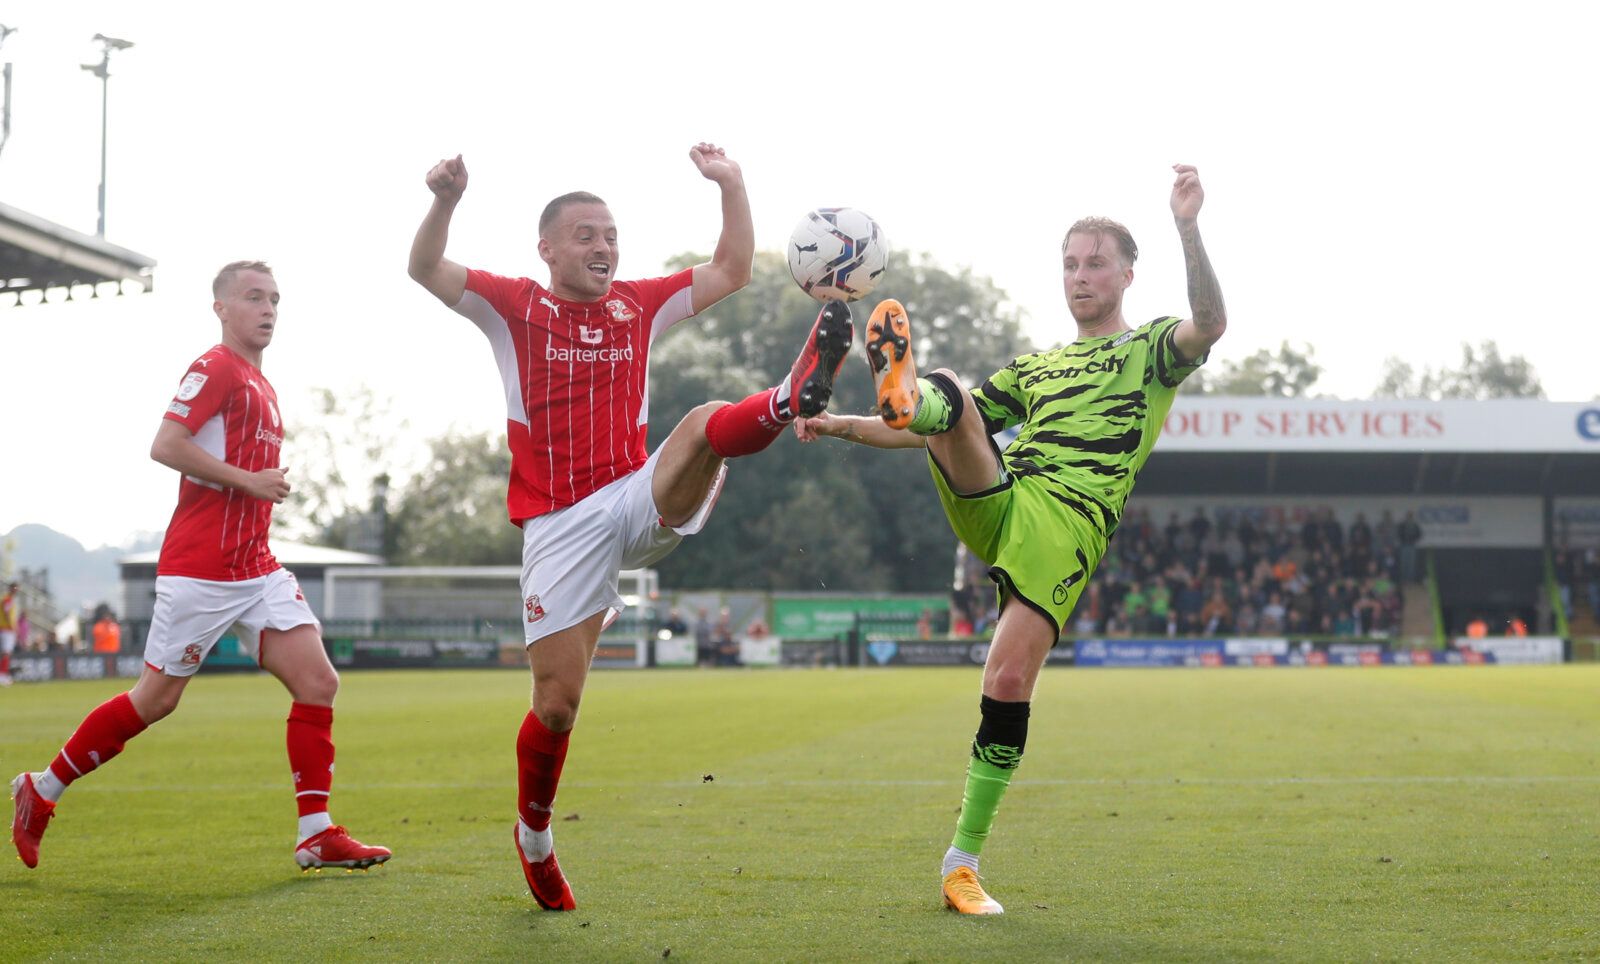 Soccer Football - League Two - Forest Green Rovers v Swindon Town - The New Lawn Stadium, Nailsworth, Britain - October 9, 2021 Forest Green Rovers’ Ben Stevenson in action with Swindon Town’s Jack Payne Action Images/Matthew Childs EDITORIAL USE ONLY. No use with unauthorized audio, video, data, fixture lists, club/league logos or 'live' services. Online in-match use limited to 75 images, no video emulation. No use in betting, games or single club /league/player publications.  Please contact yo